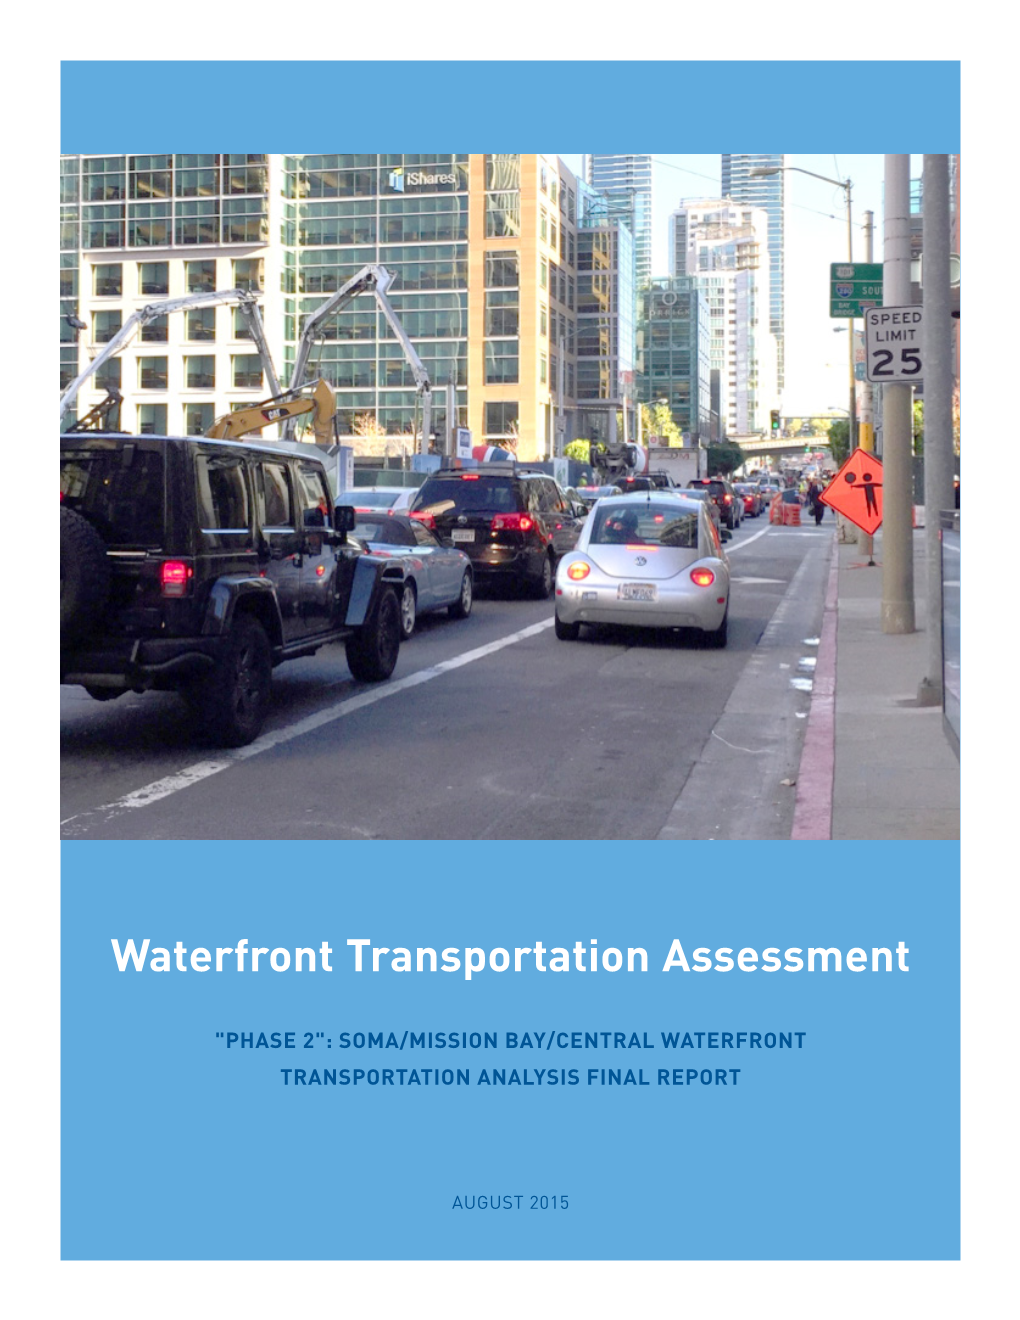 Final Phase 2 Report: Waterfront Transportation Assessment, 2015